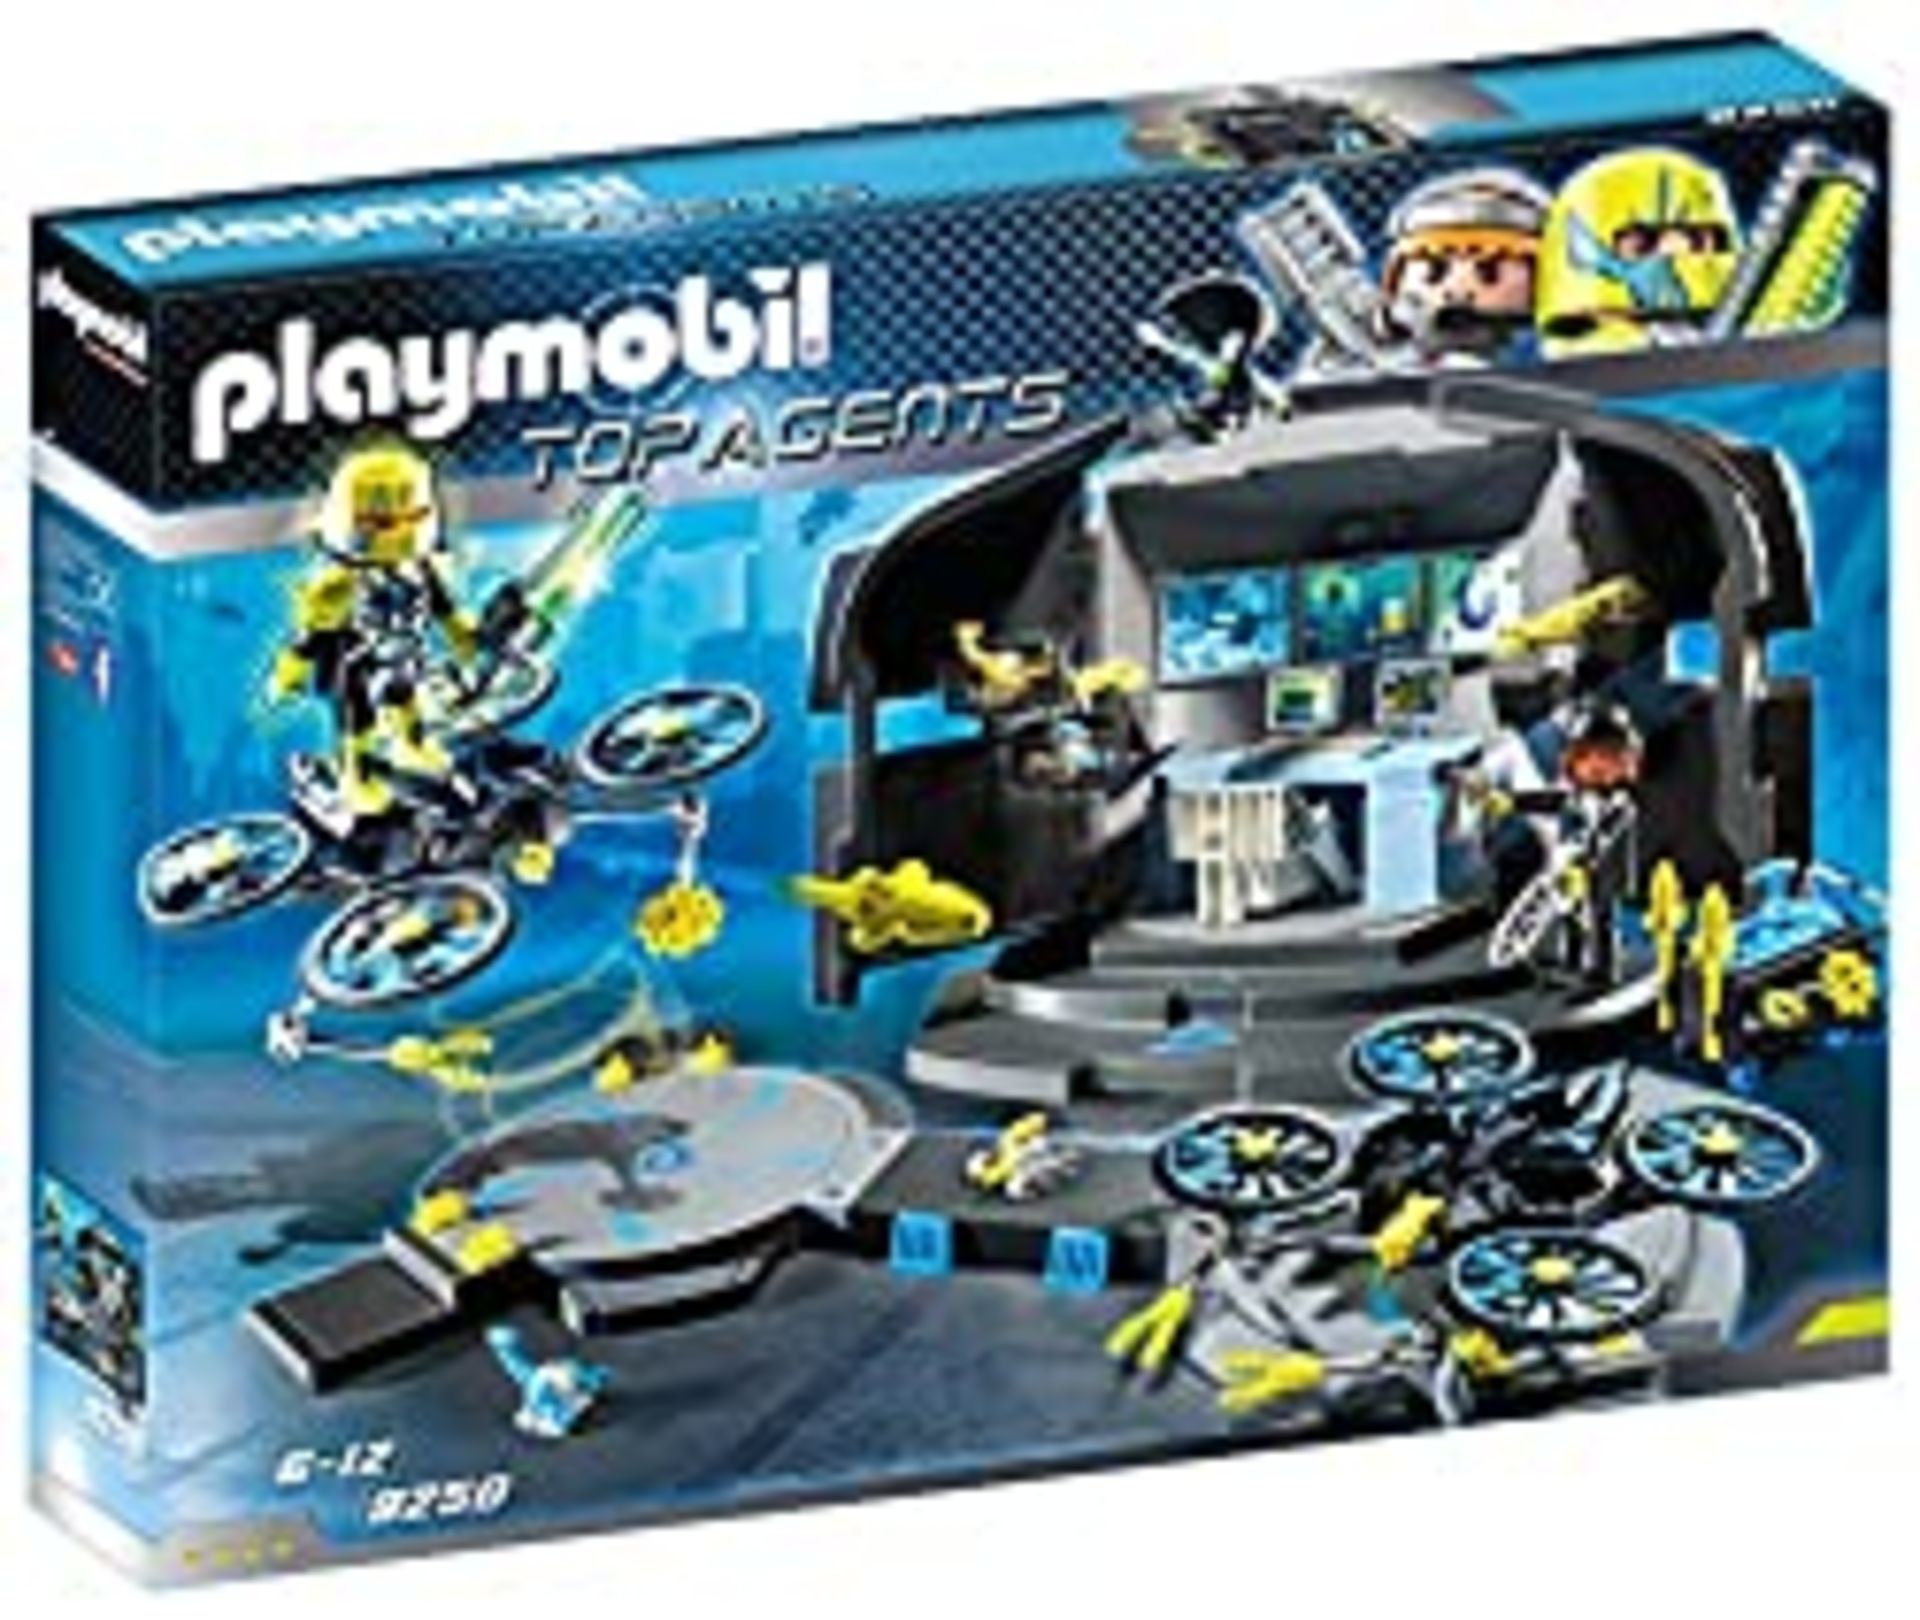 RRP £25.03 Playmobil 9250 Top Agents Dr. Drone's Command Base Toy Set, Multi